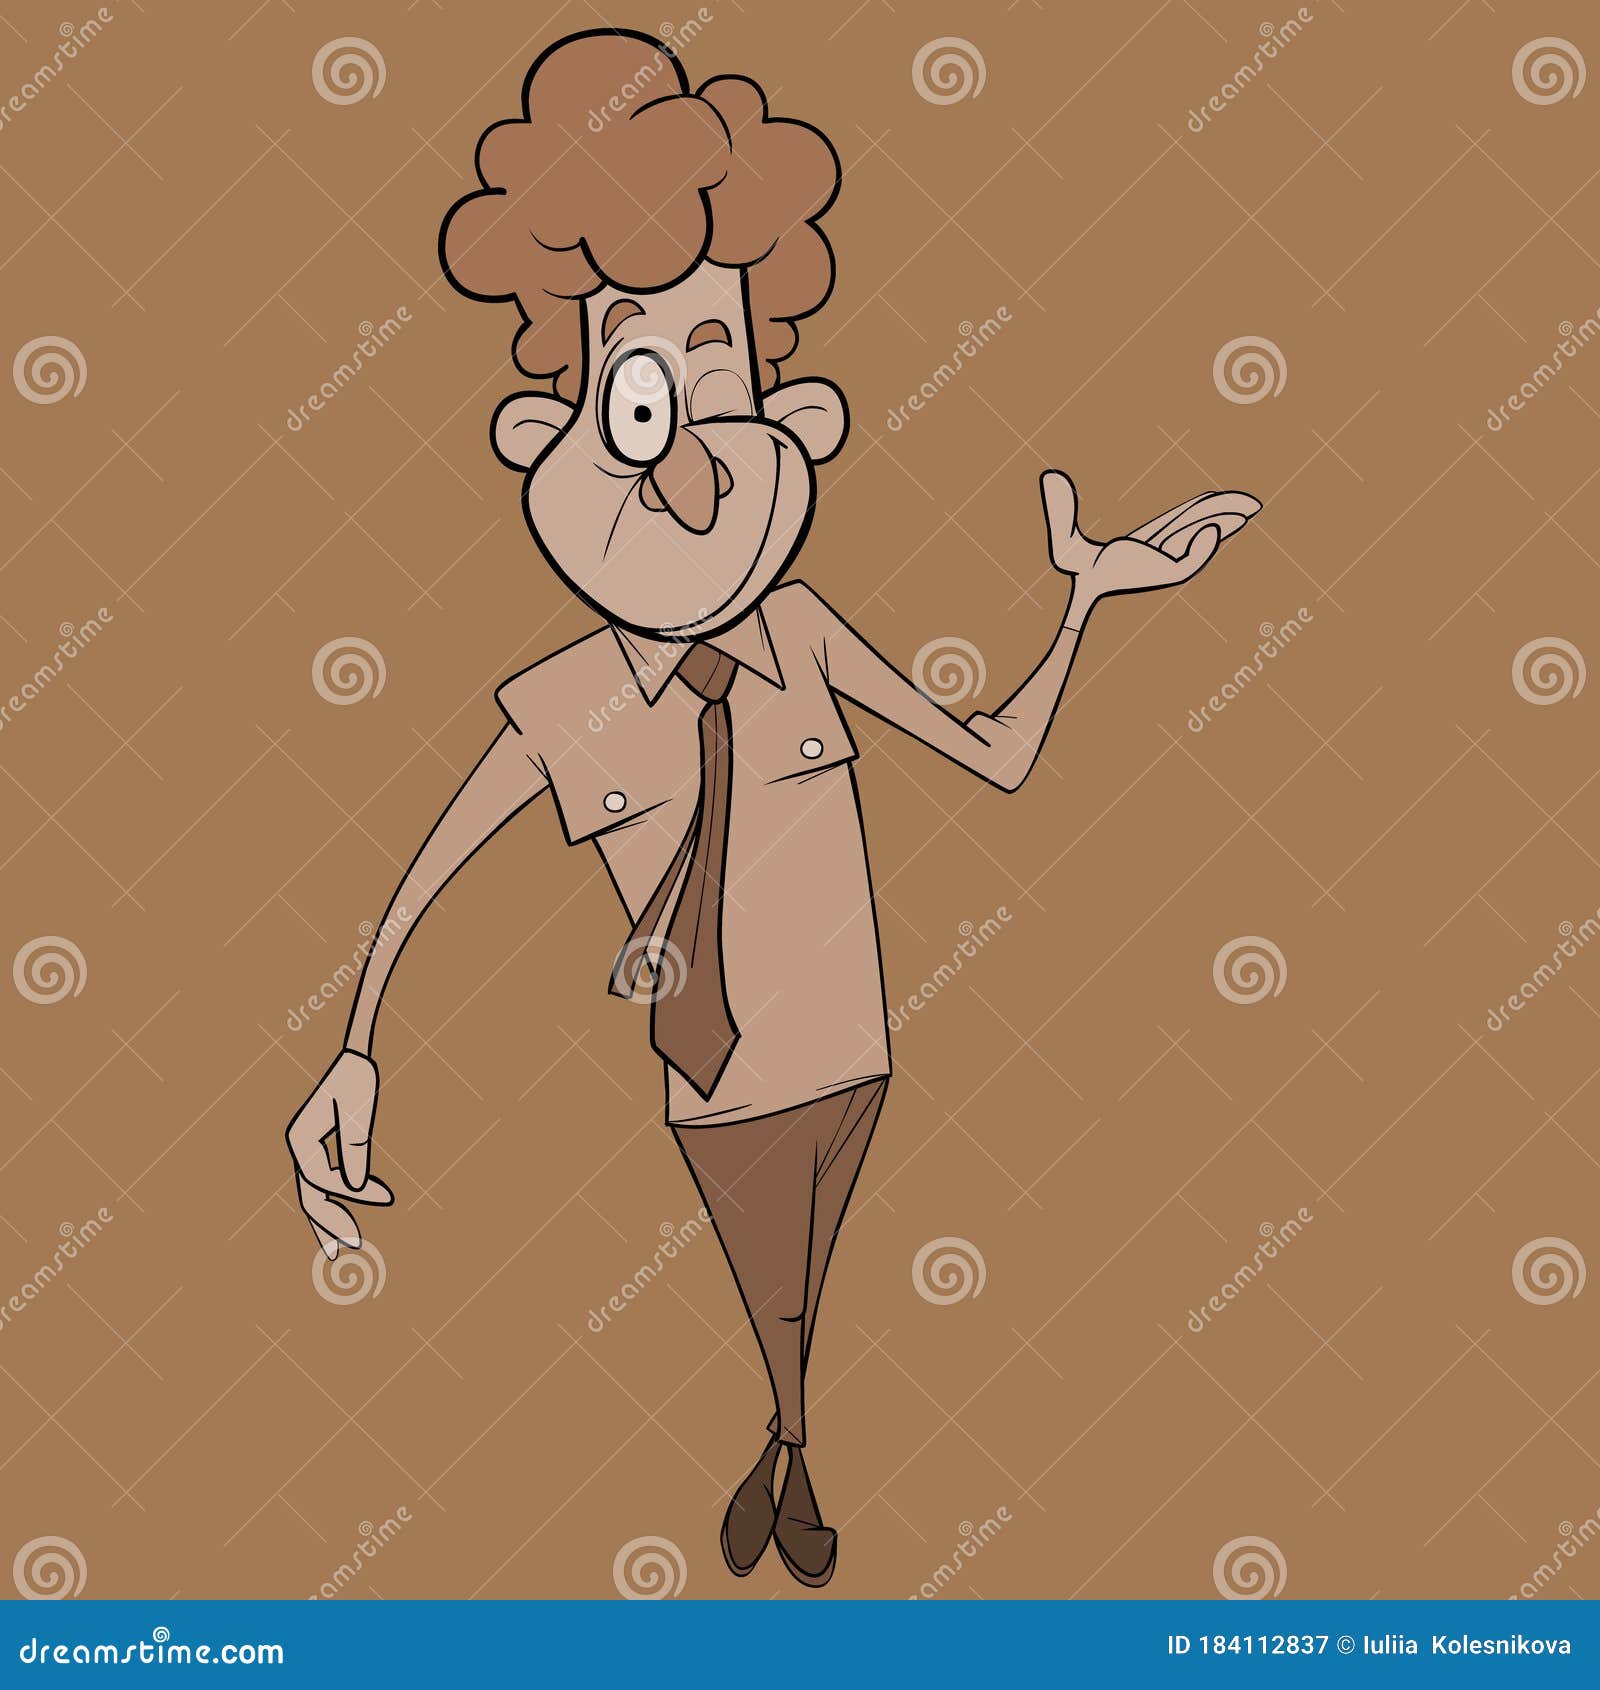 Funny Curly Smiling Cartoon Man Cheerfully Winks in a Pose of a Dancer ...